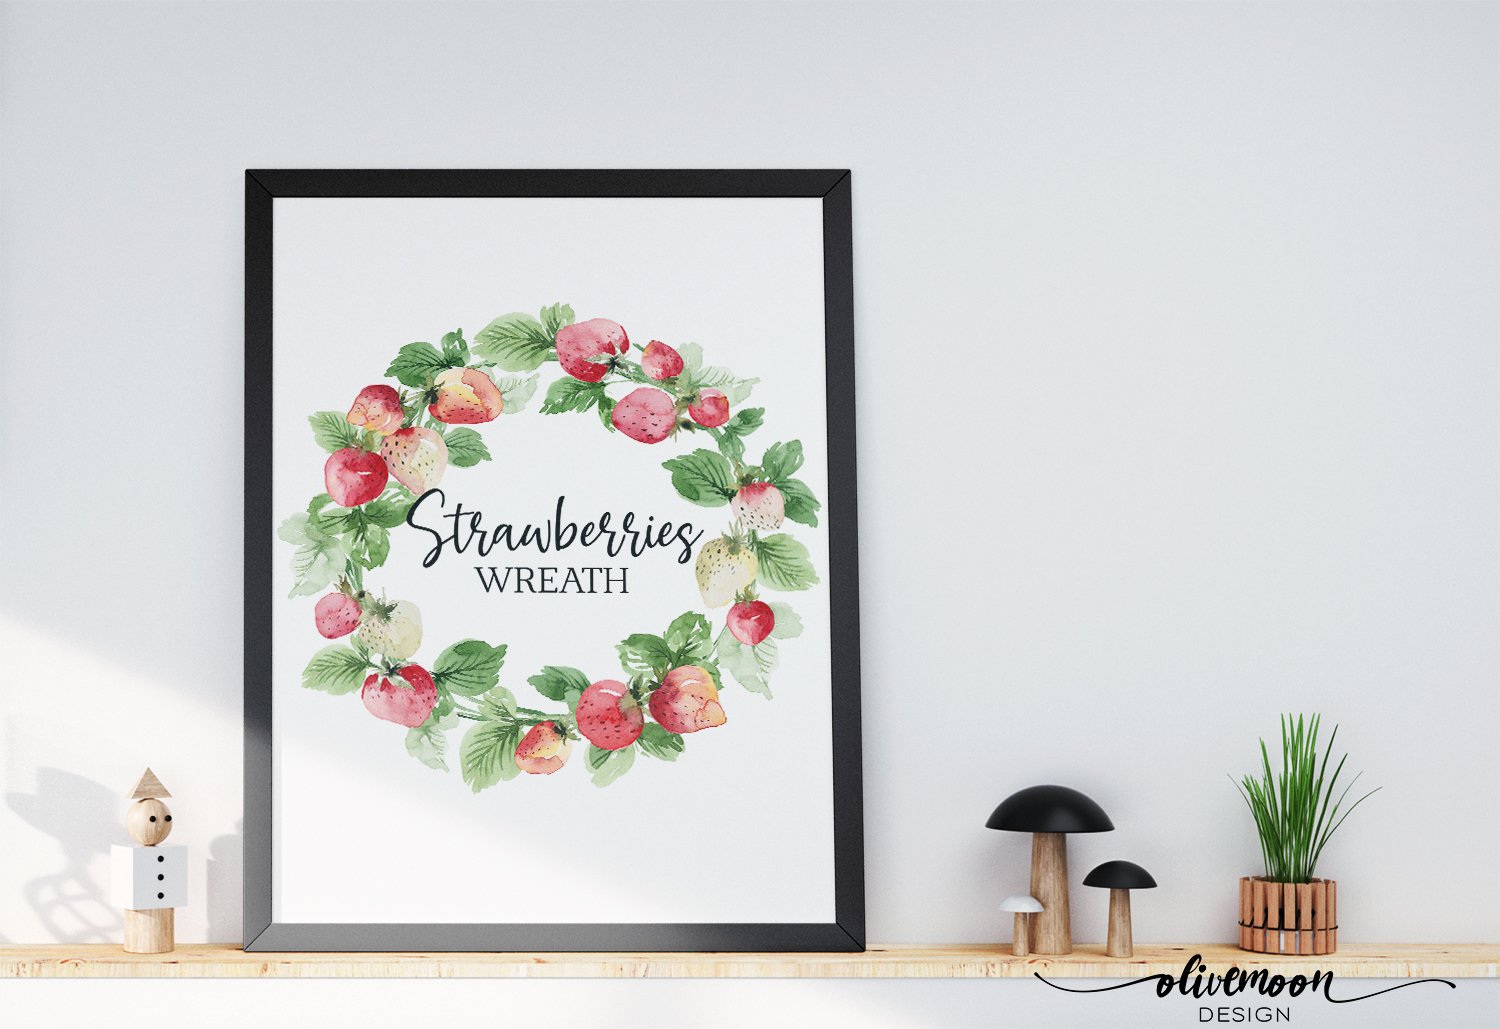 White painting in black frame with black lettering "Strawberry Wreath" in the centre of a strawberry wreath.